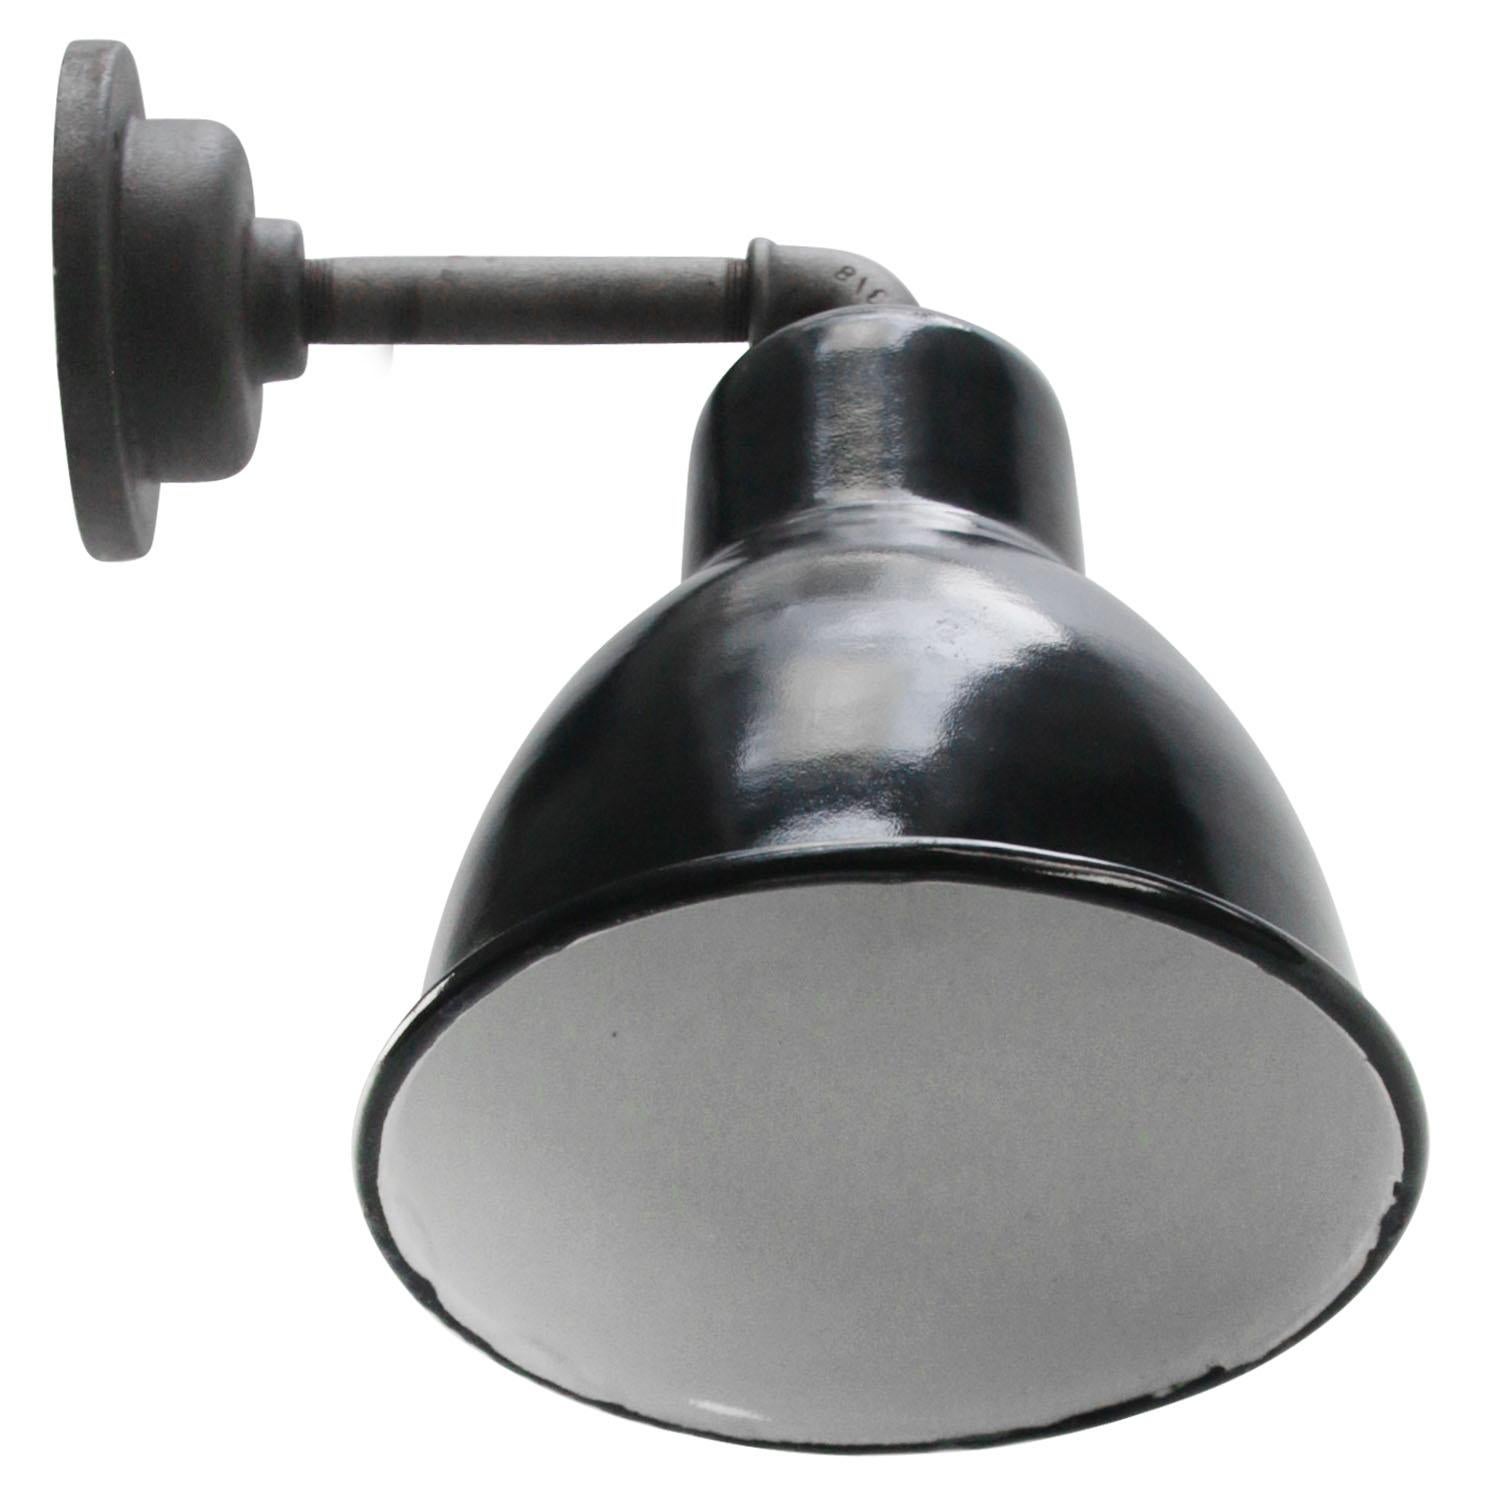 Vintage Industrial Black Enamel Cast Iron Wall Light Scones In Good Condition For Sale In Amsterdam, NL